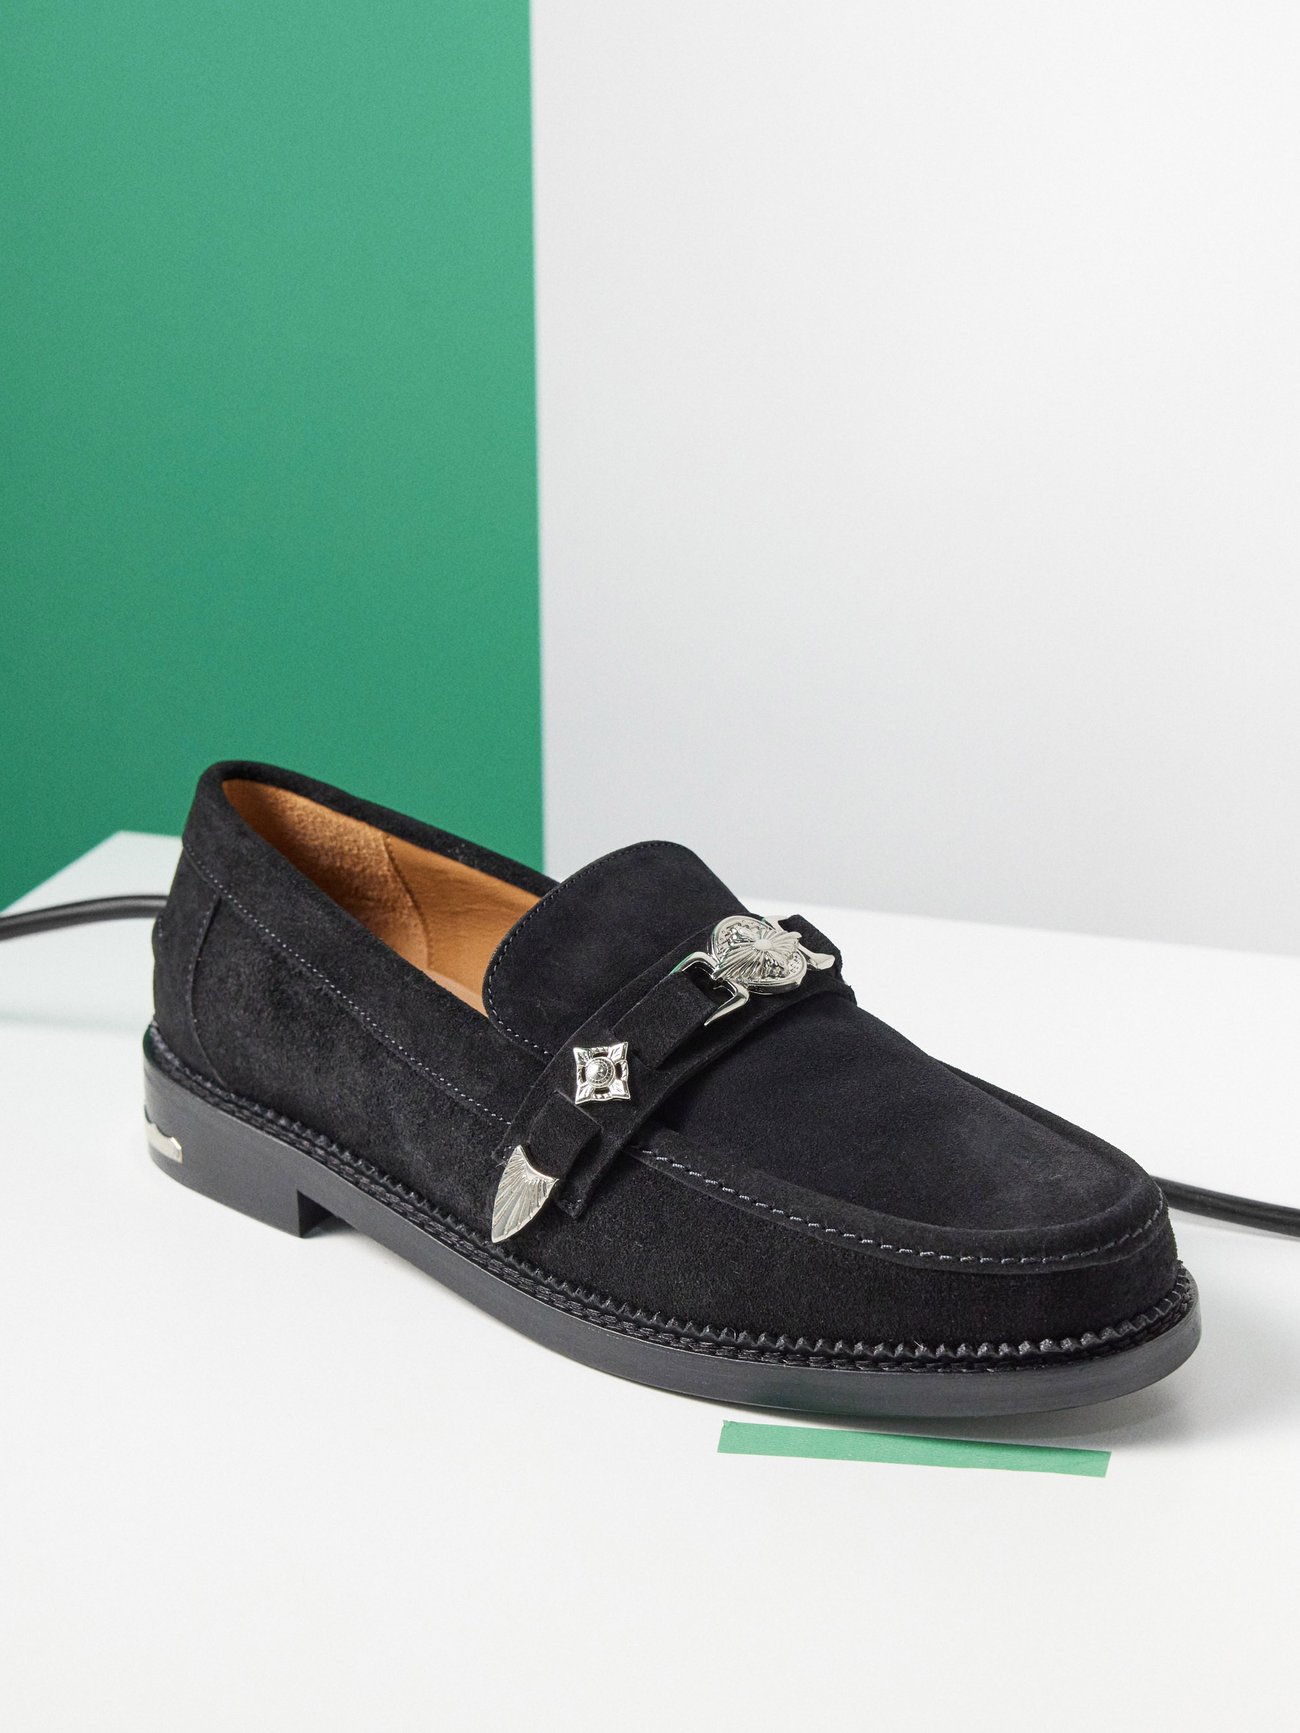 Polido metal-plaque suede loafers